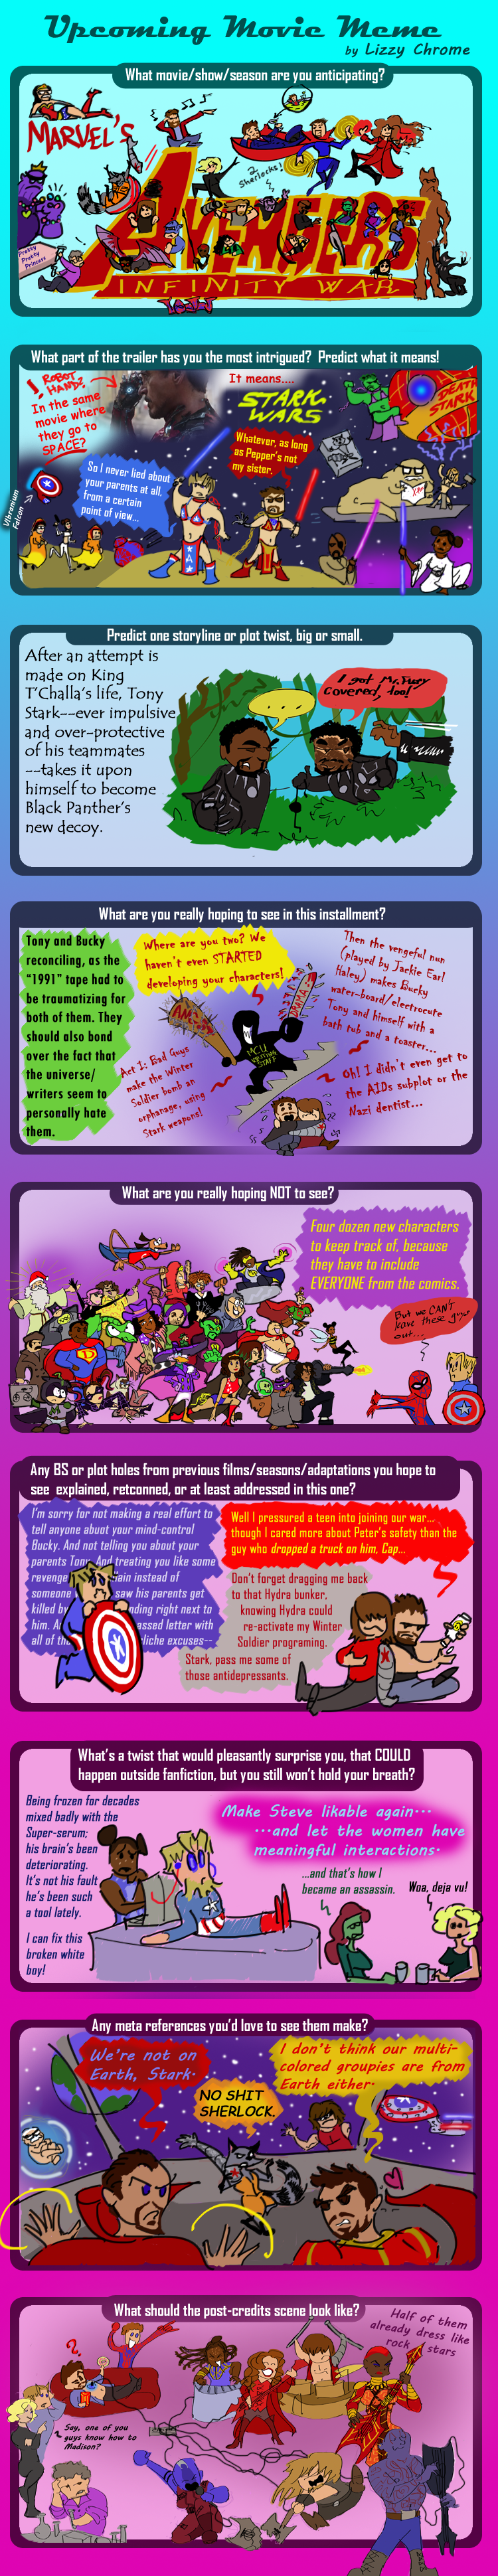 Upcoming Movie Meme Infinity War By LizzyChrome On DeviantArt